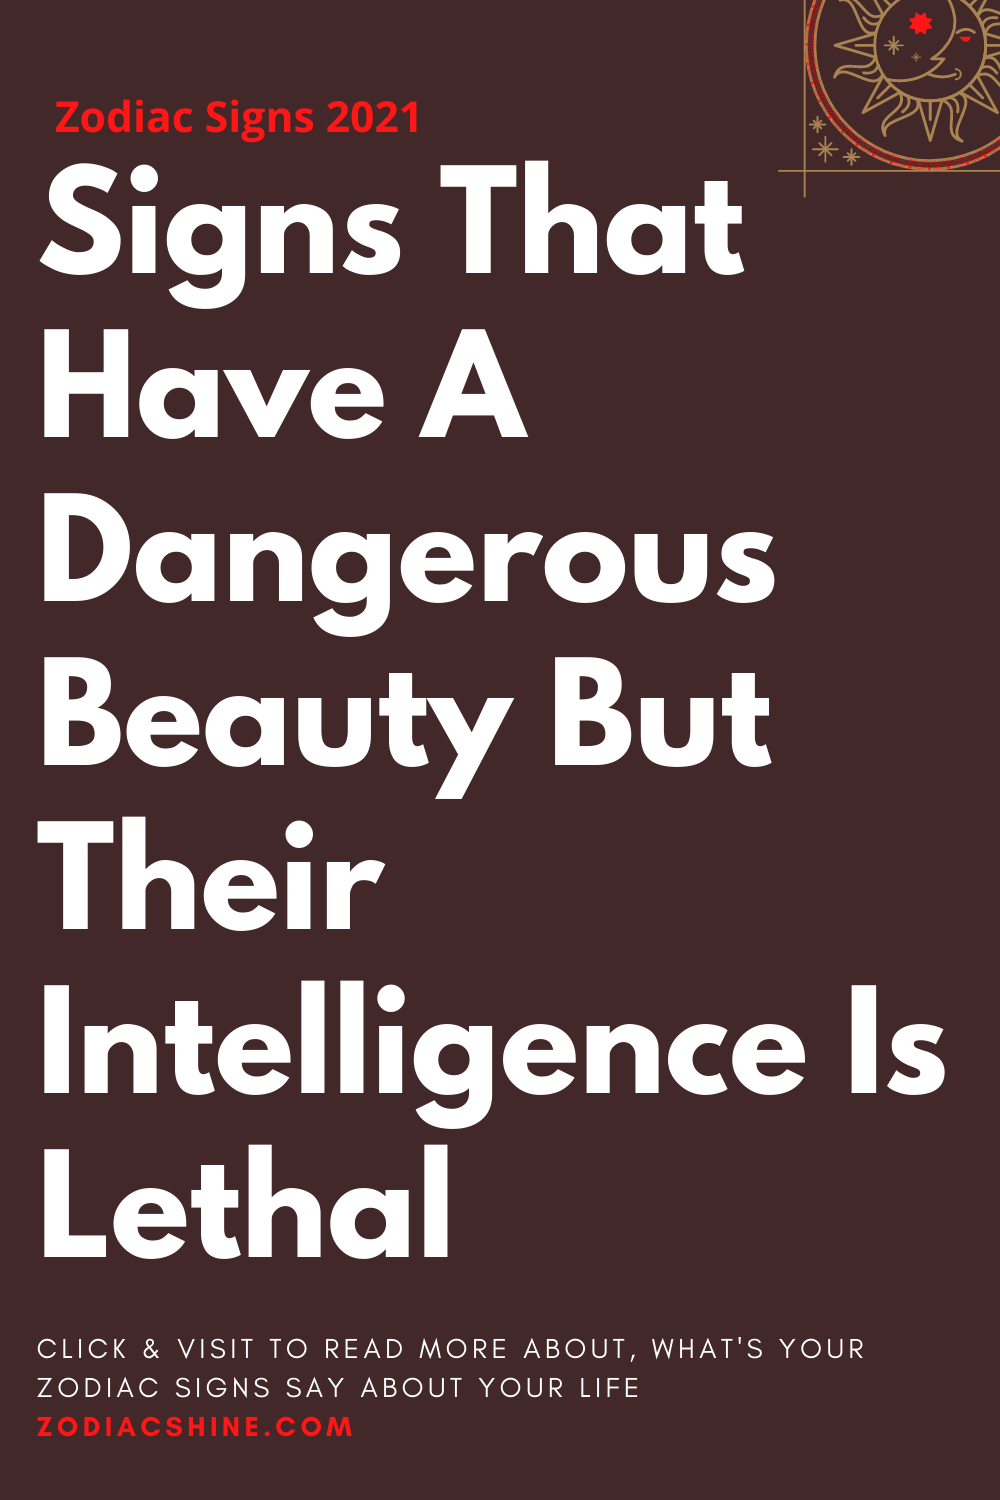 Signs That Have A Dangerous Beauty But Their Intelligence Is Lethal